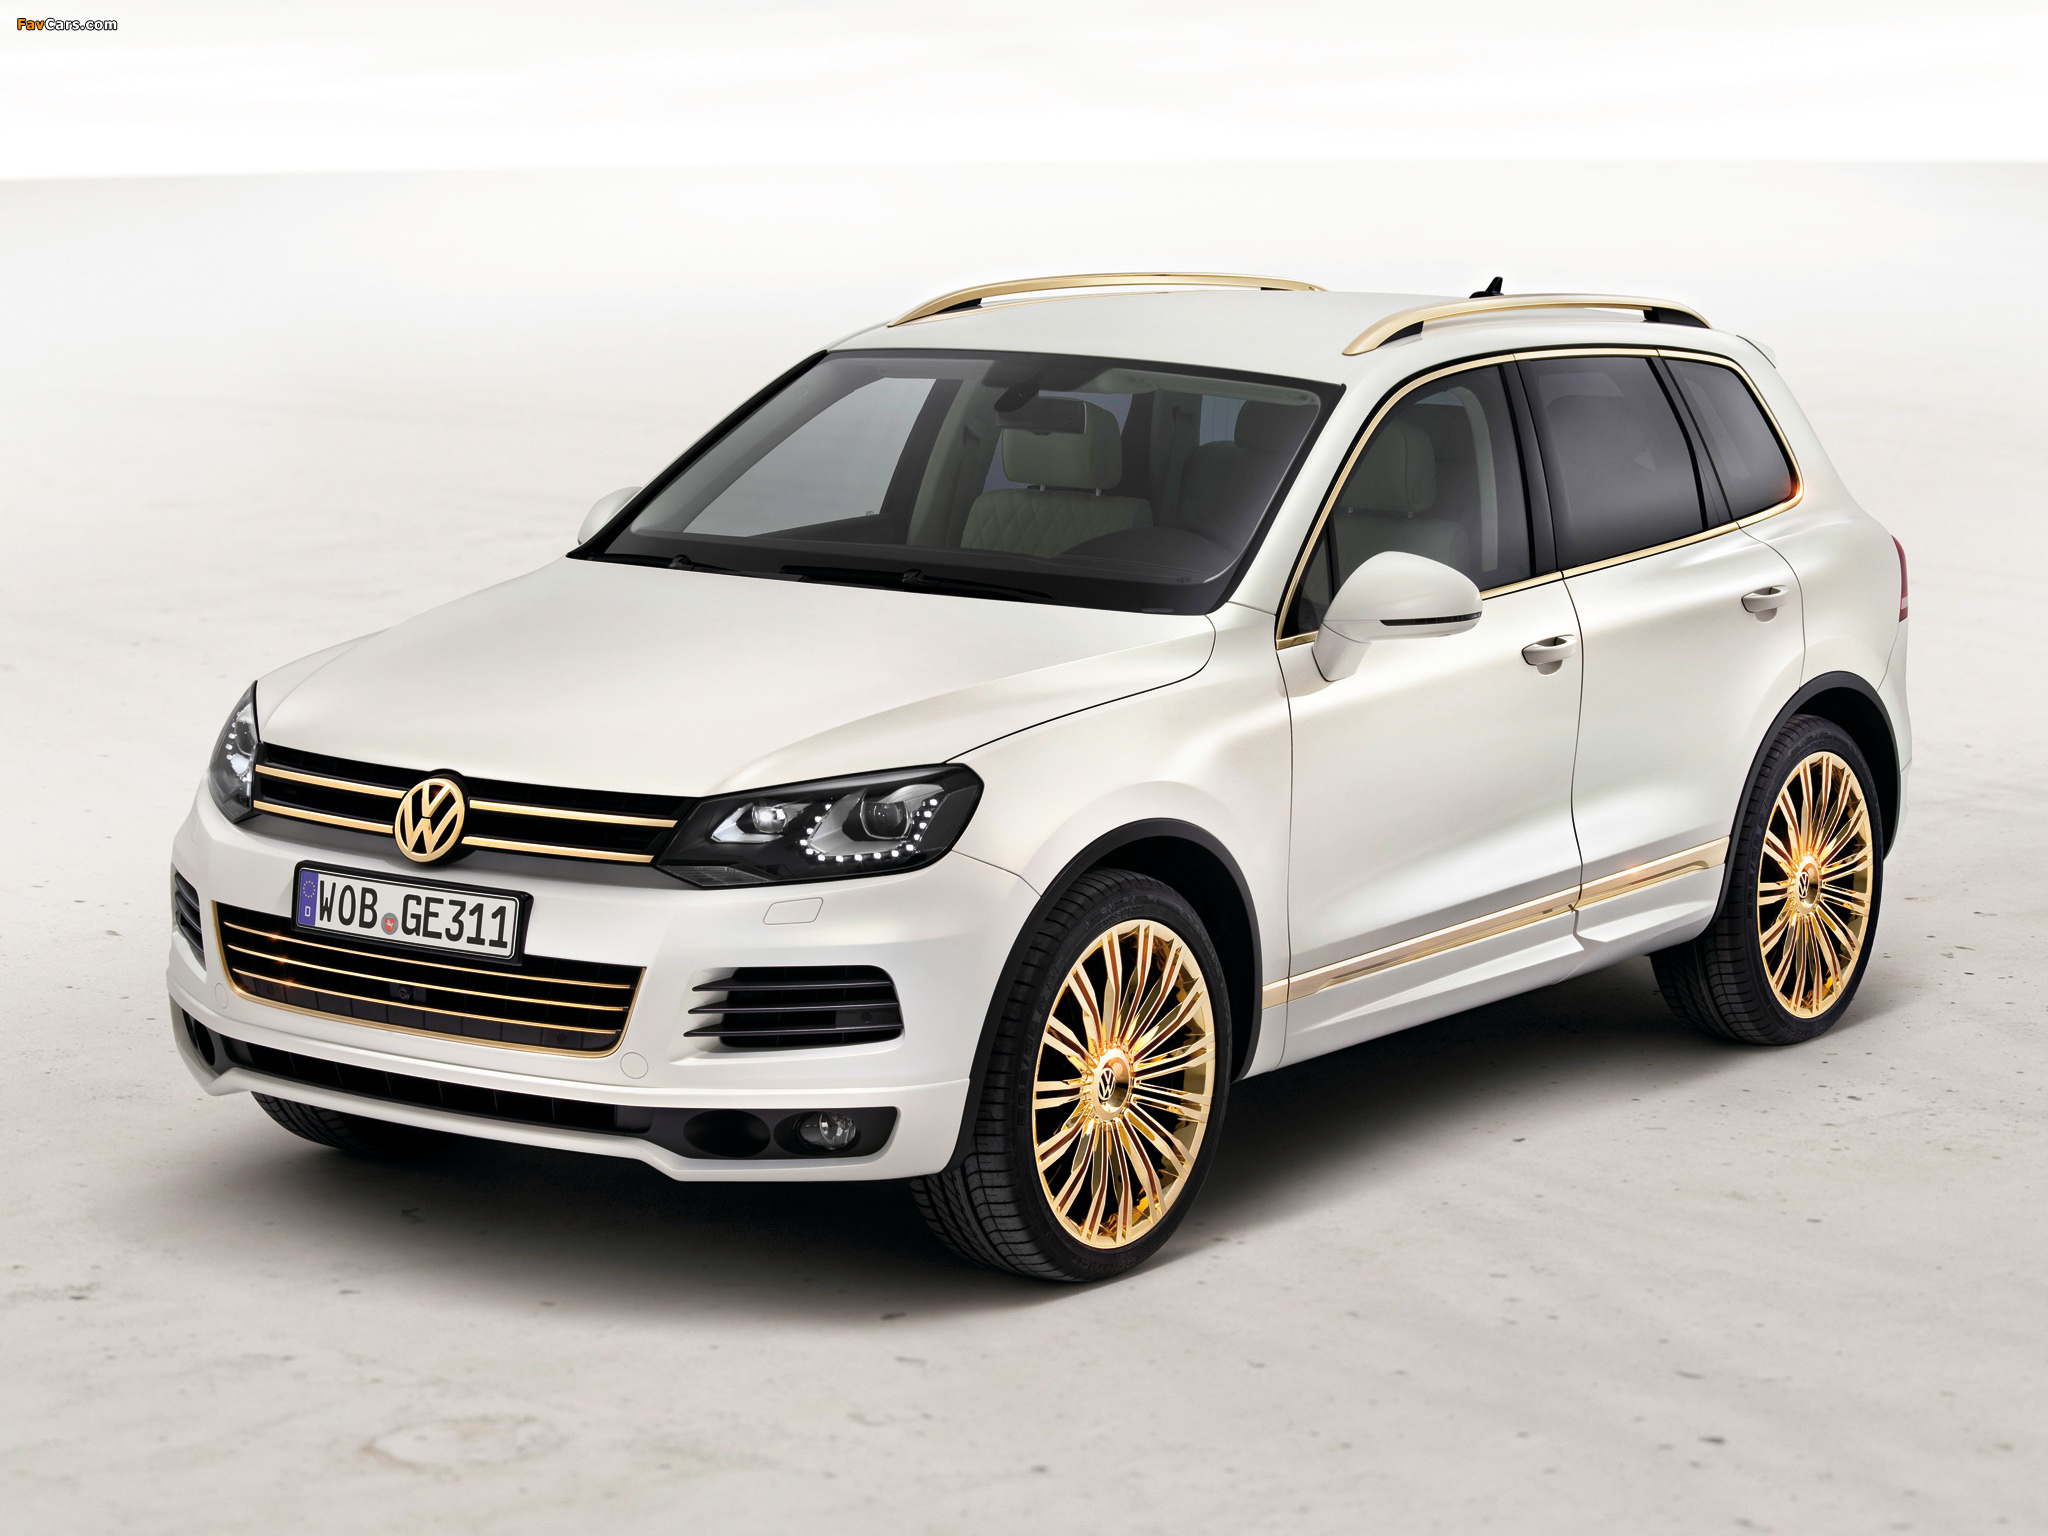 Volkswagen Touareg V8 TDI Gold Edition Concept 2011 wallpapers (2048 x 1536)